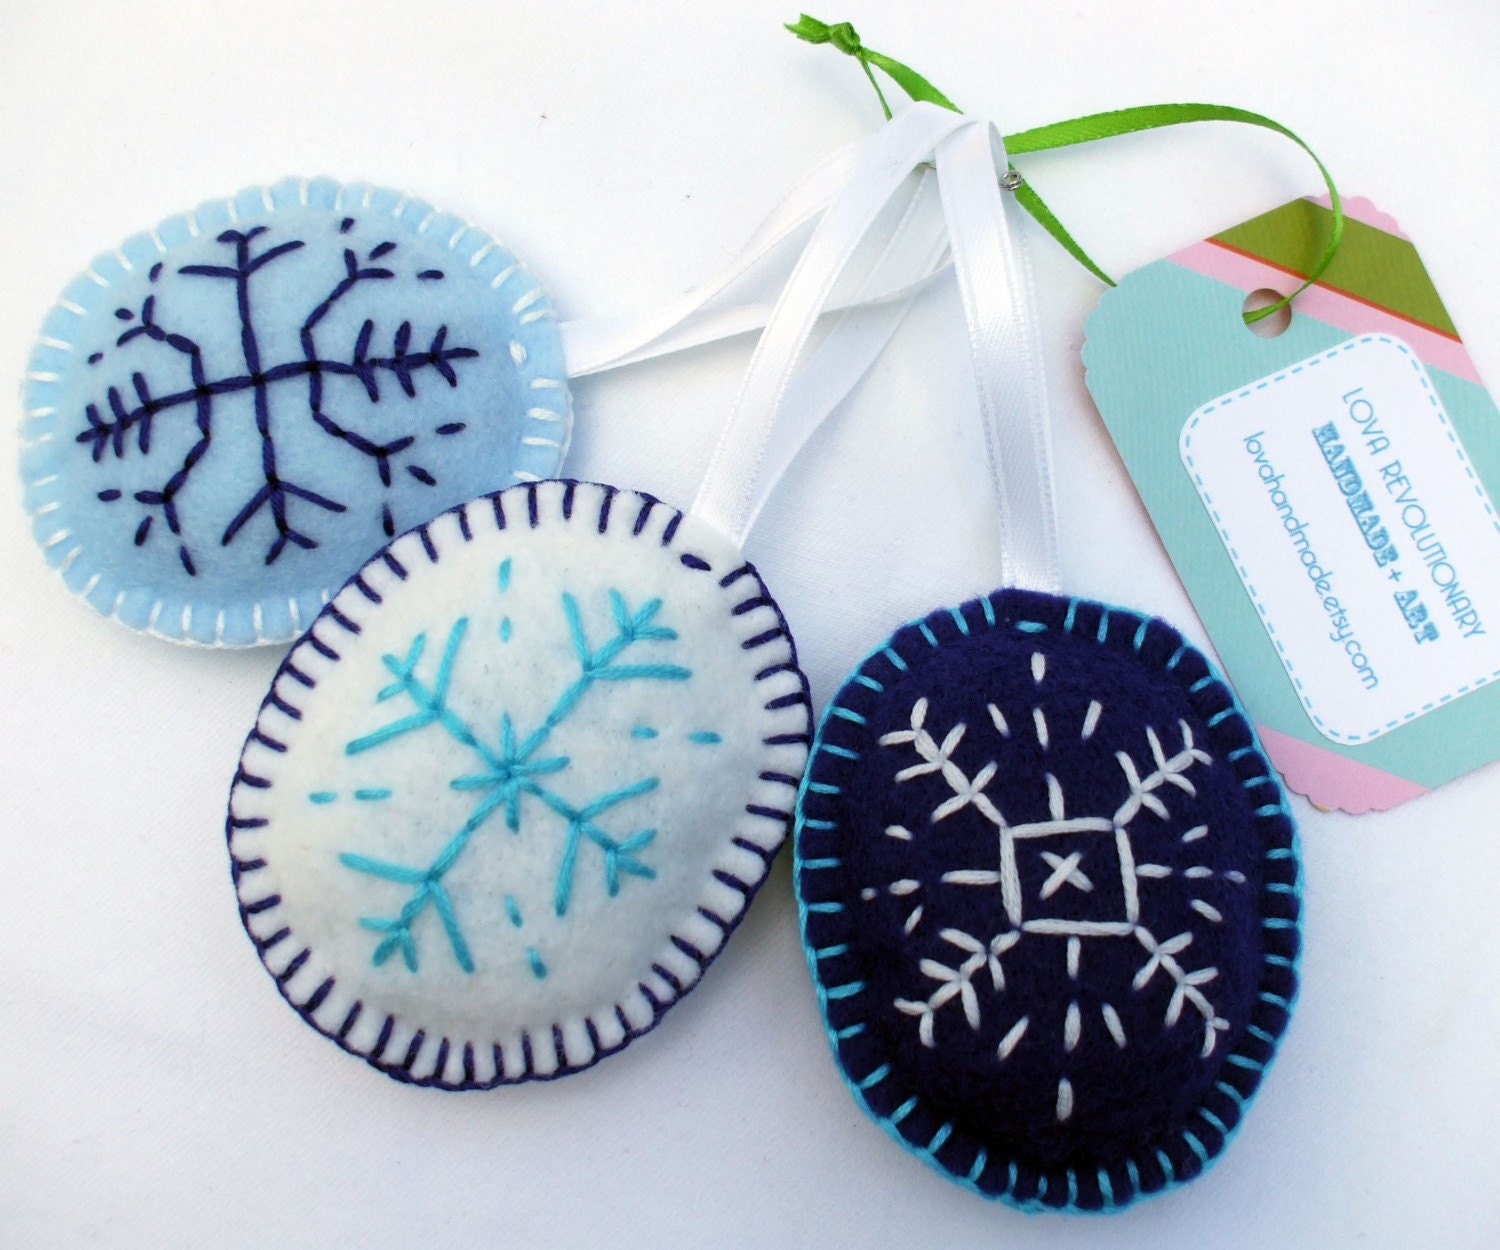 Embroidery Patterns Winter Wonderland Snowflakes by SeptemberHouse